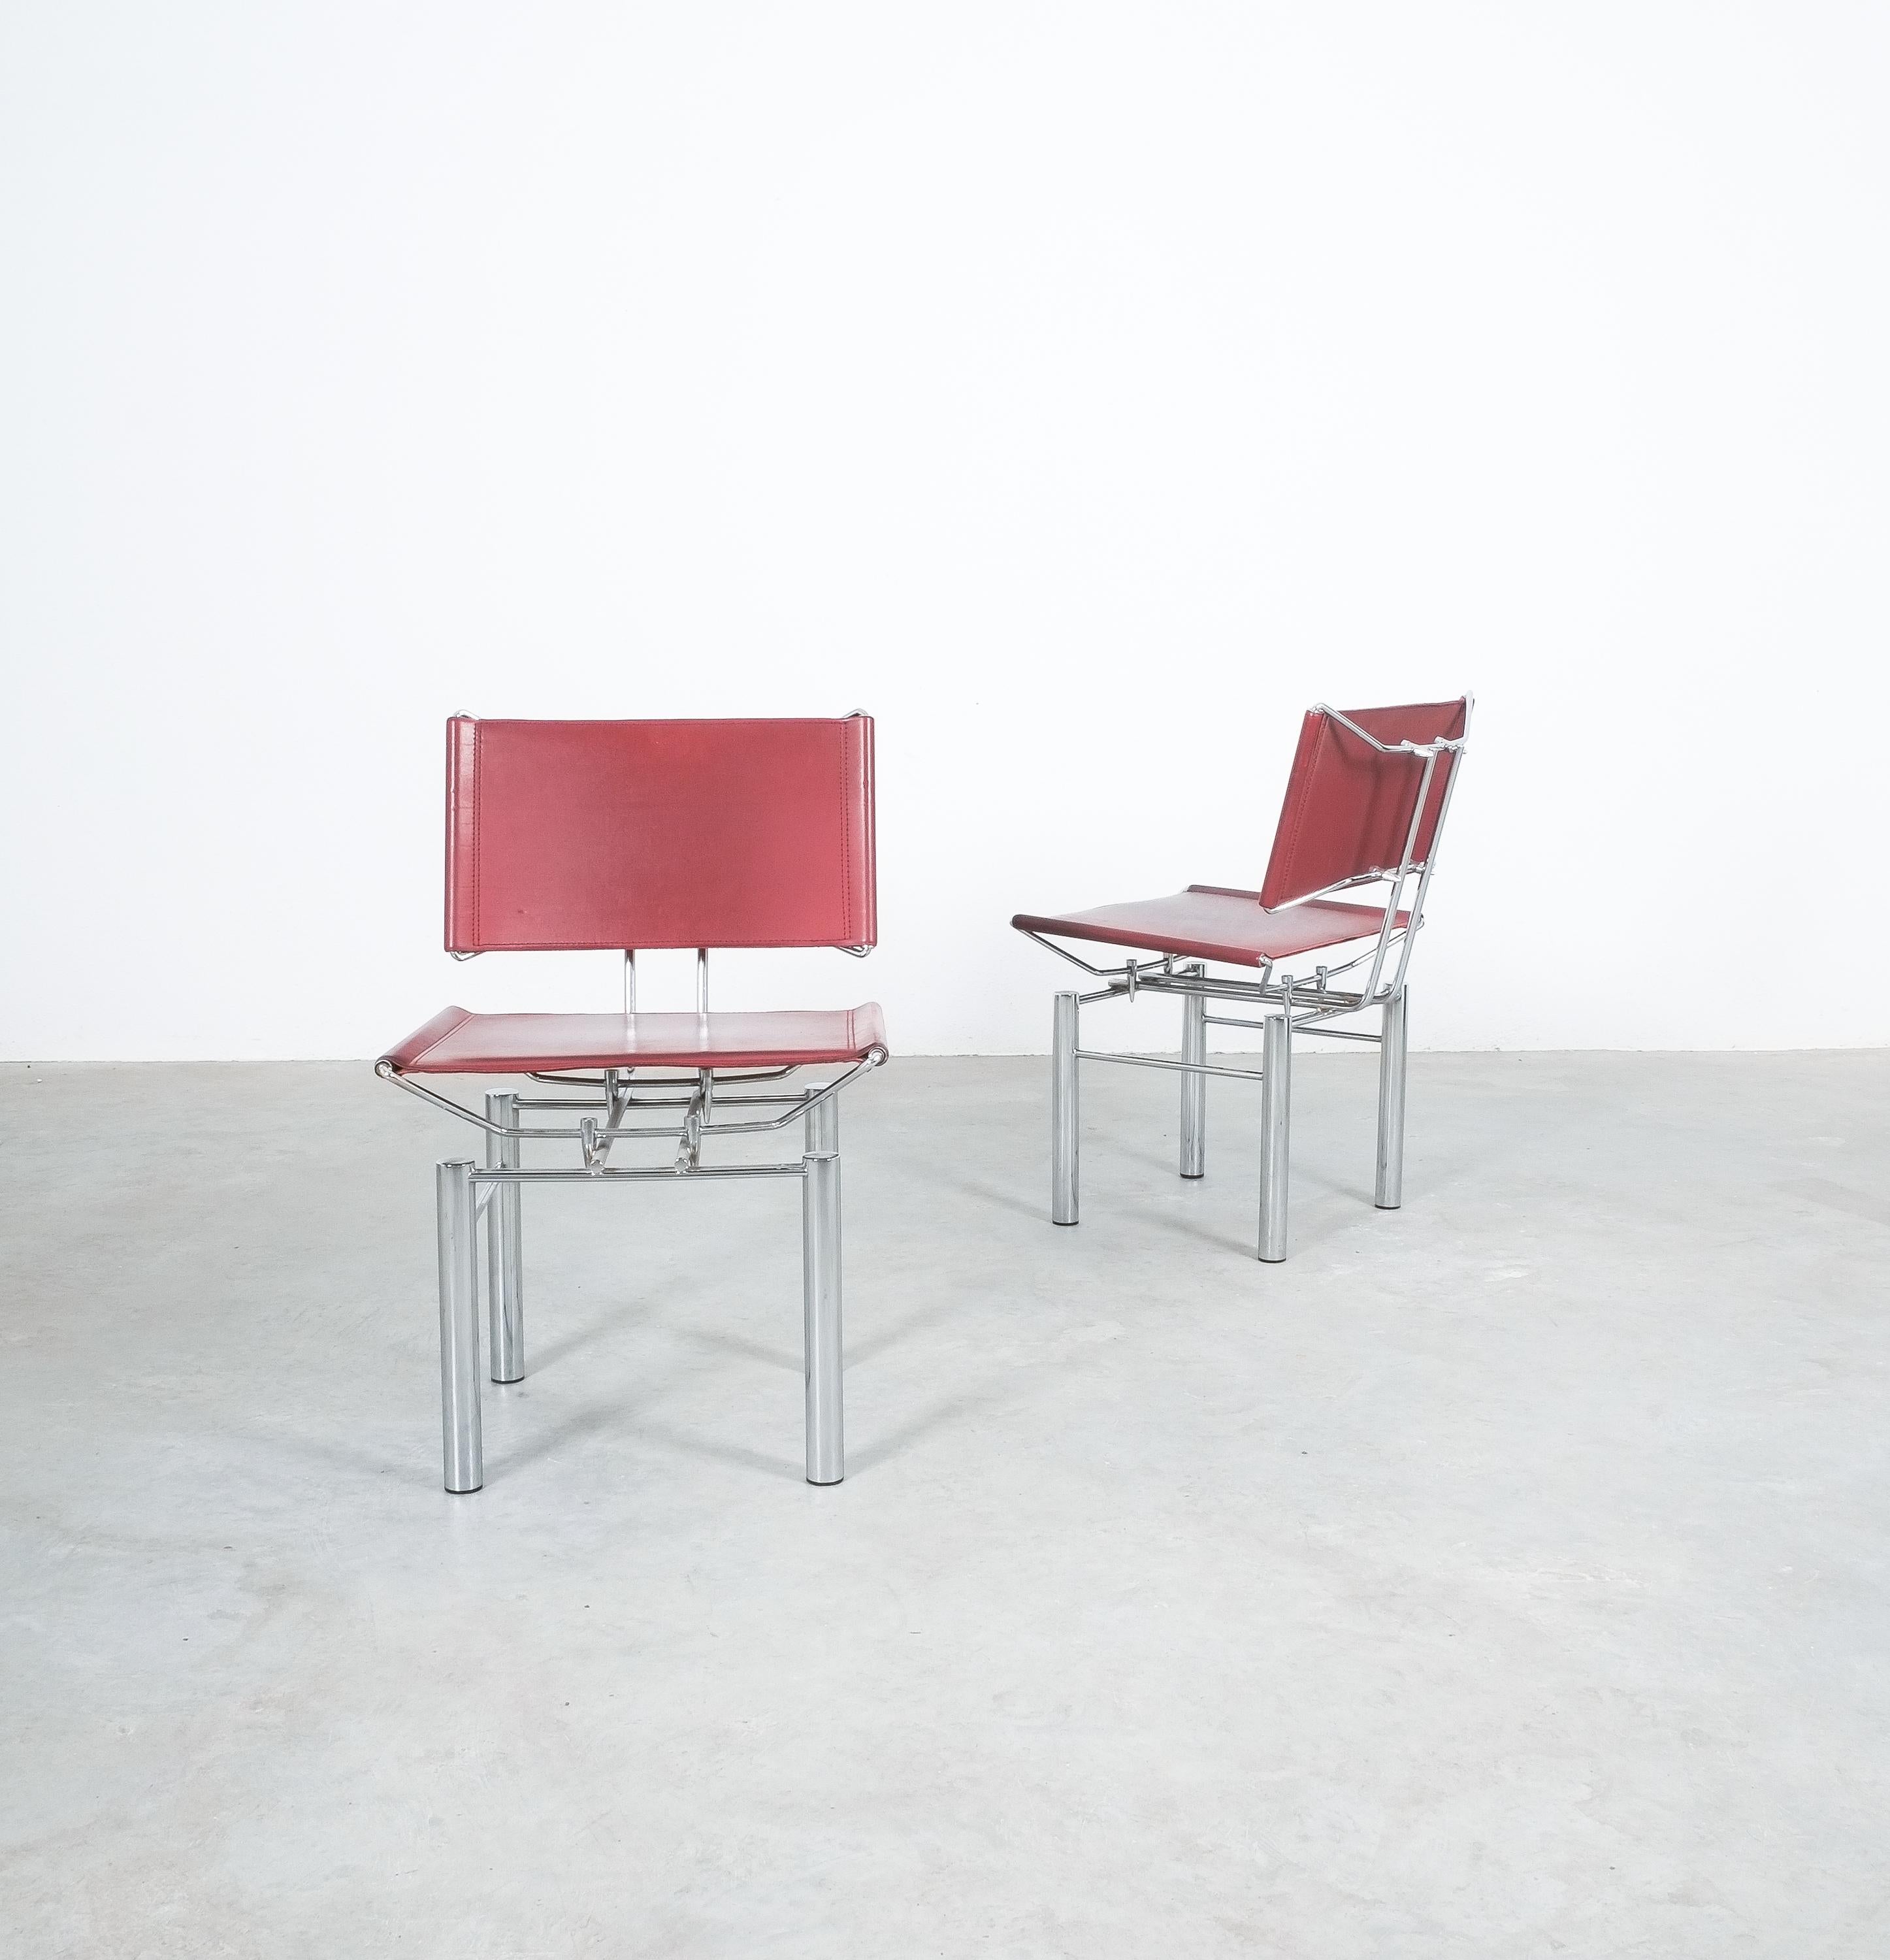 Late 20th Century Hans Ullrich Bitsch Chairs Set of 6 Red Leather Chrome Metal Series 8600, 1980 For Sale